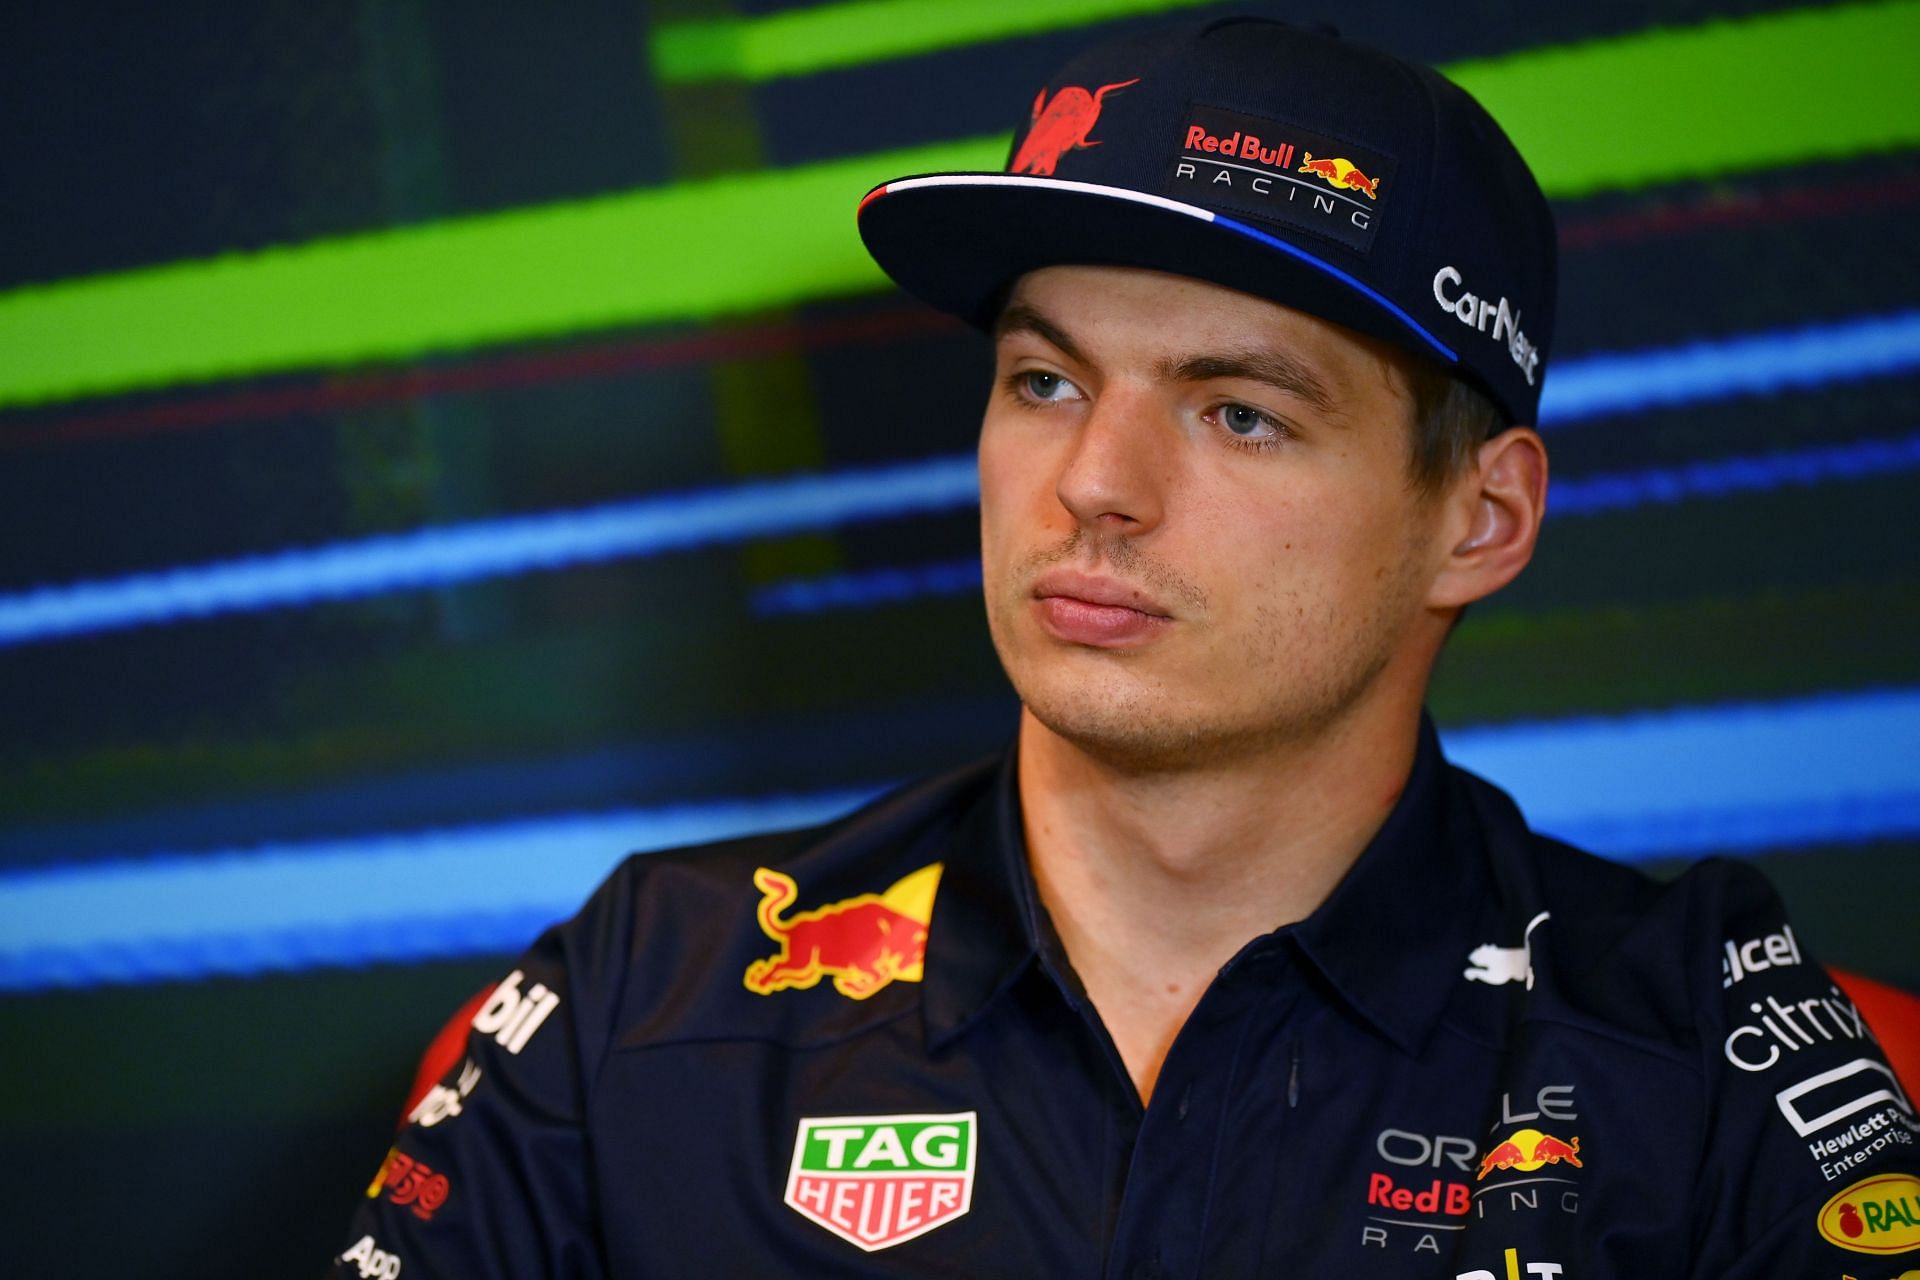 Max Verstappen looks on in the Drivers Press Conference prior to practice ahead of the F1 Grand Prix of Azerbaijan at Baku City Circuit on June 10, 2022 in Baku, Azerbaijan. (Photo by Dan Mullan/Getty Images)